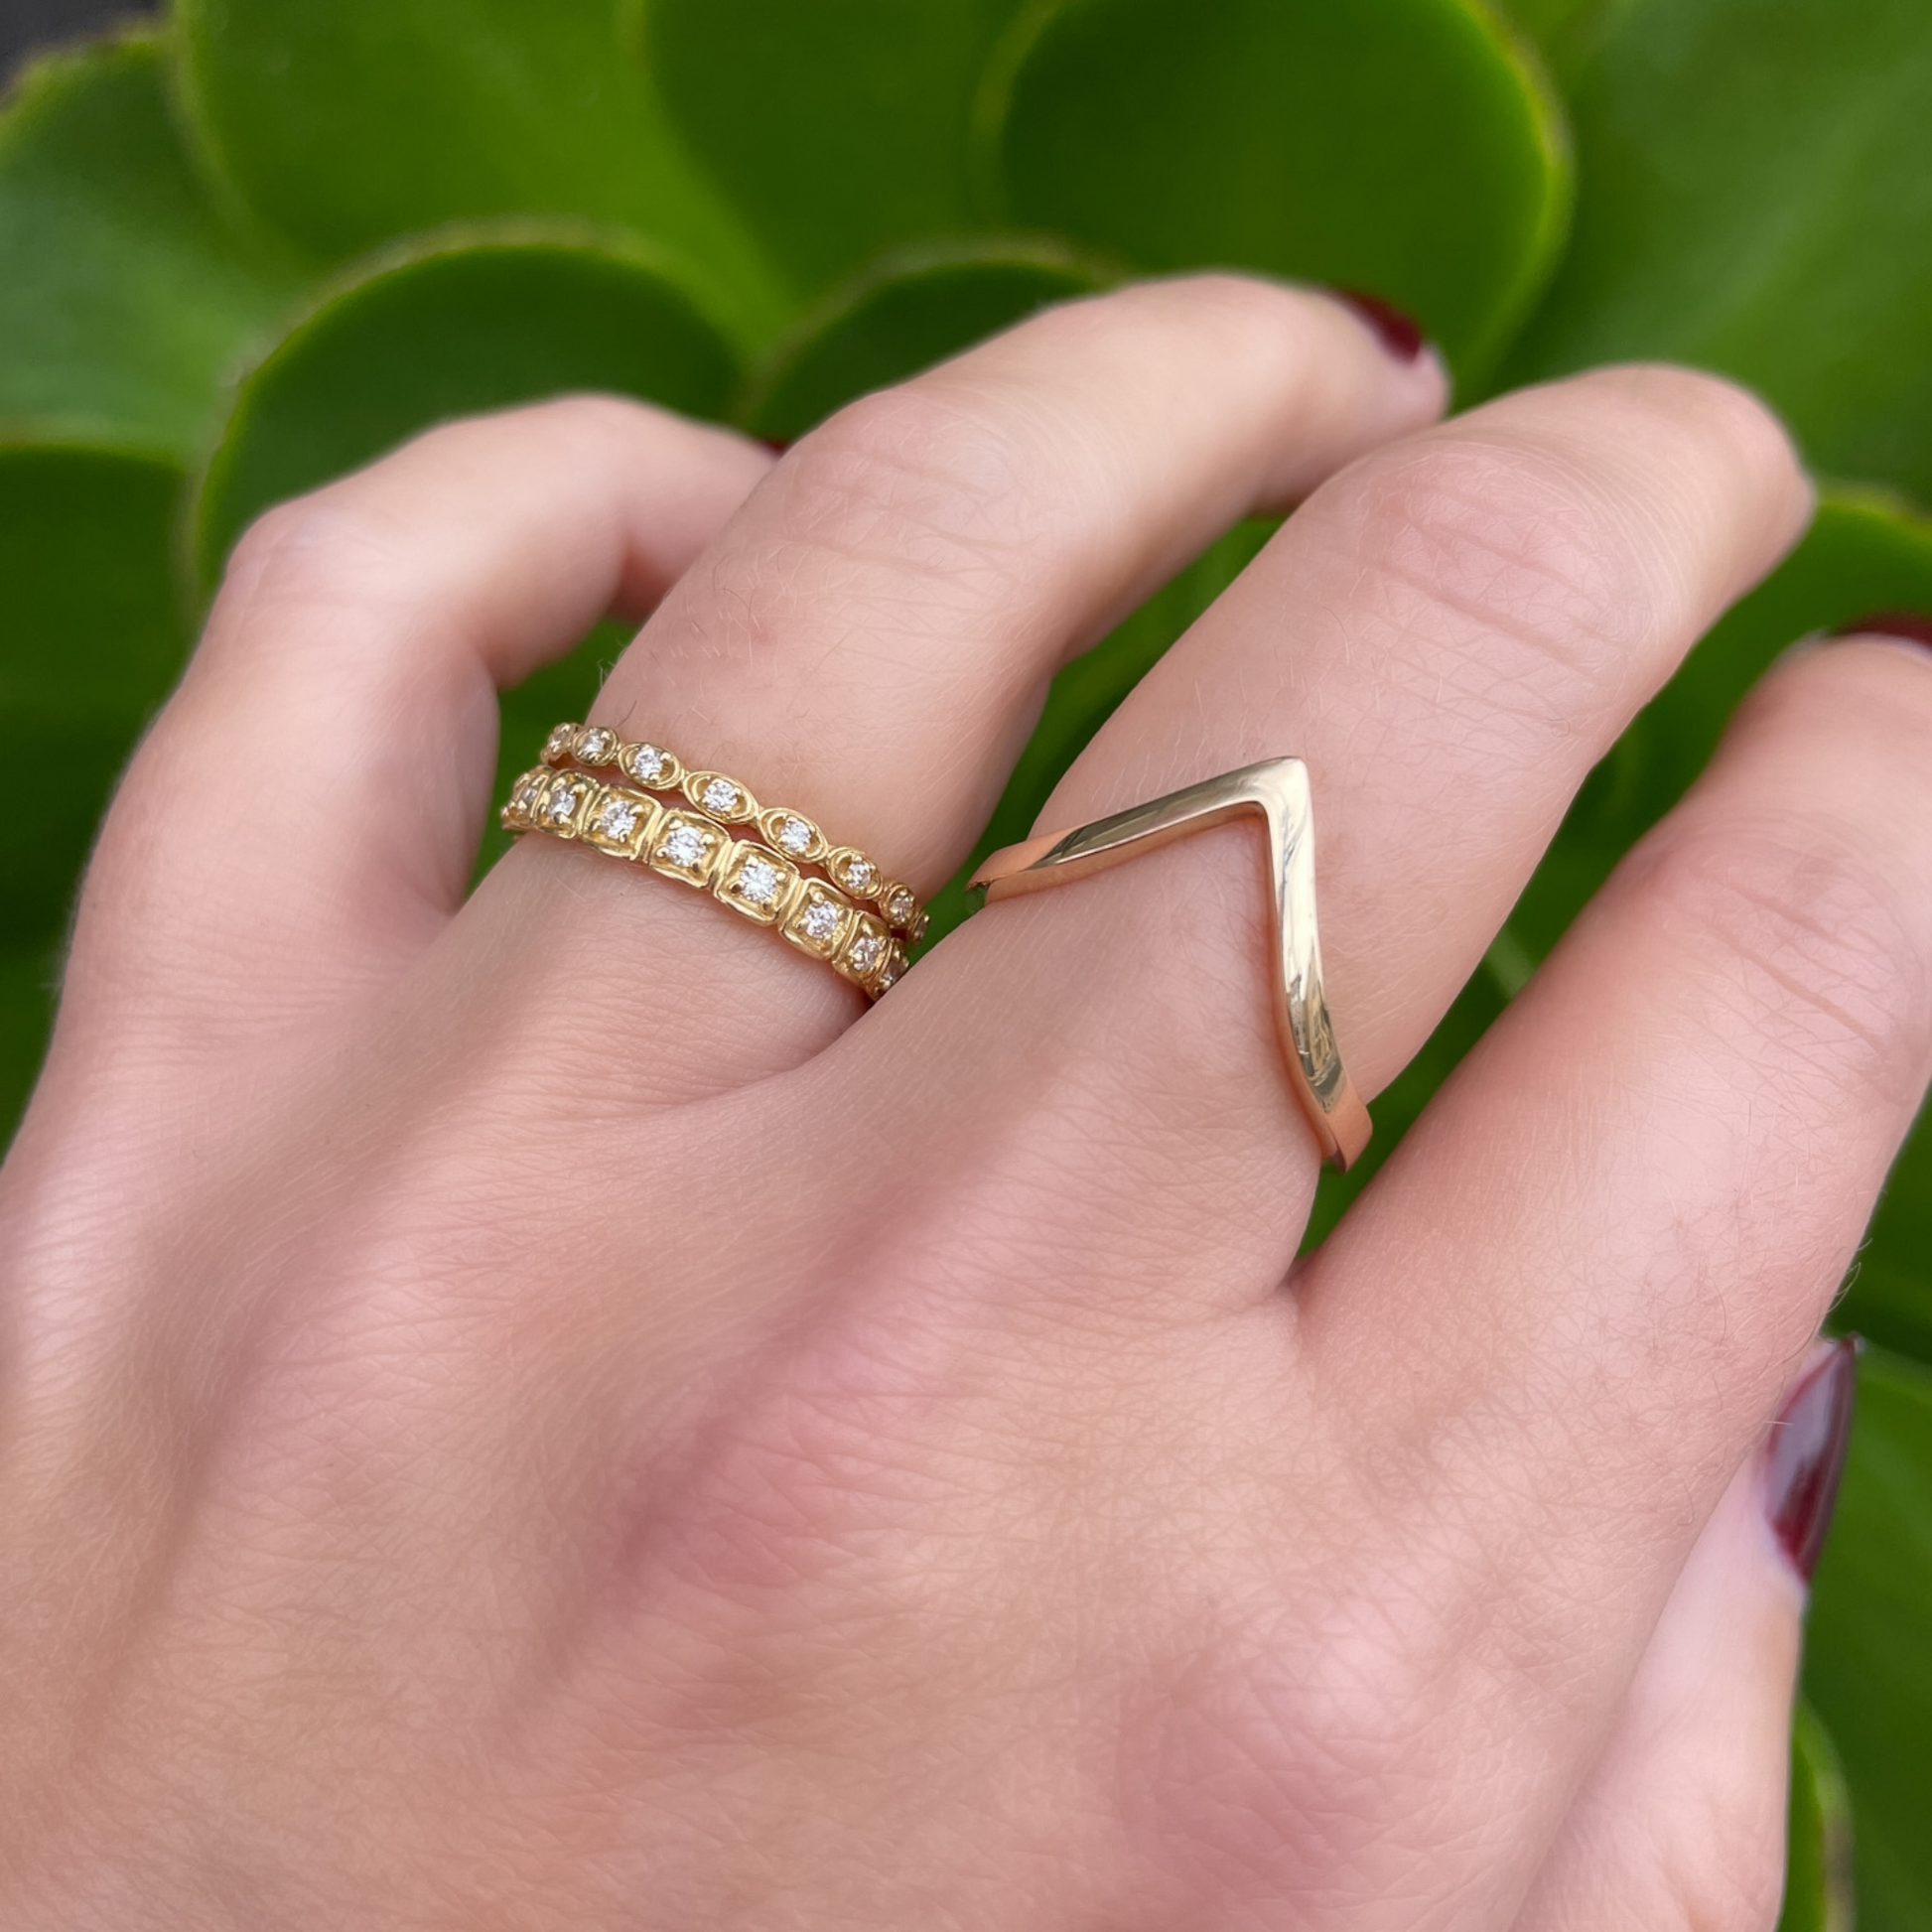 OctaHedron Jewelry San Francisco Made Yellow Gold Stacking Rings 14k & 18k Gold With Diamonds